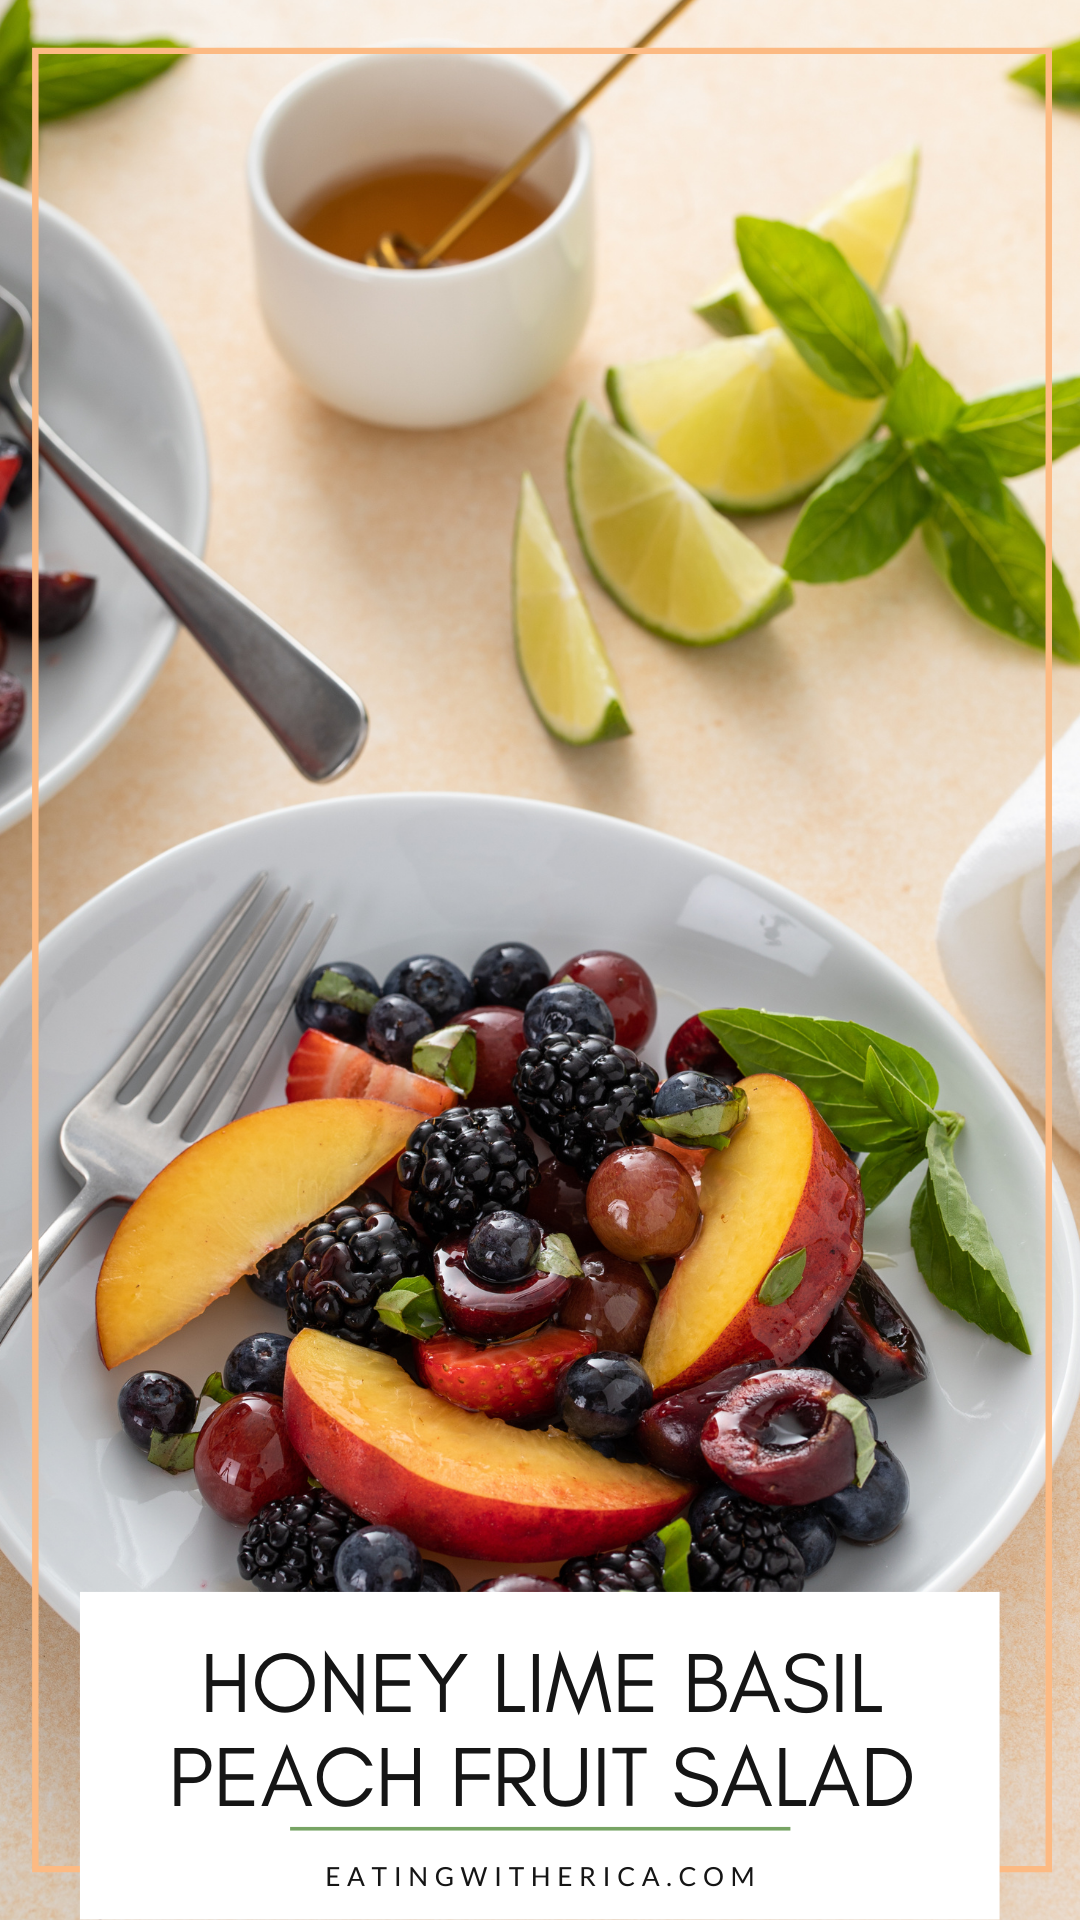 Looking for the perfect summer fruit salad? Atlanta Blogger Eating with Erica is sharing this amazing Honey Lime Basil Peach Fruit Salad that is sure the be the hit at any summer party! Make it HERE!